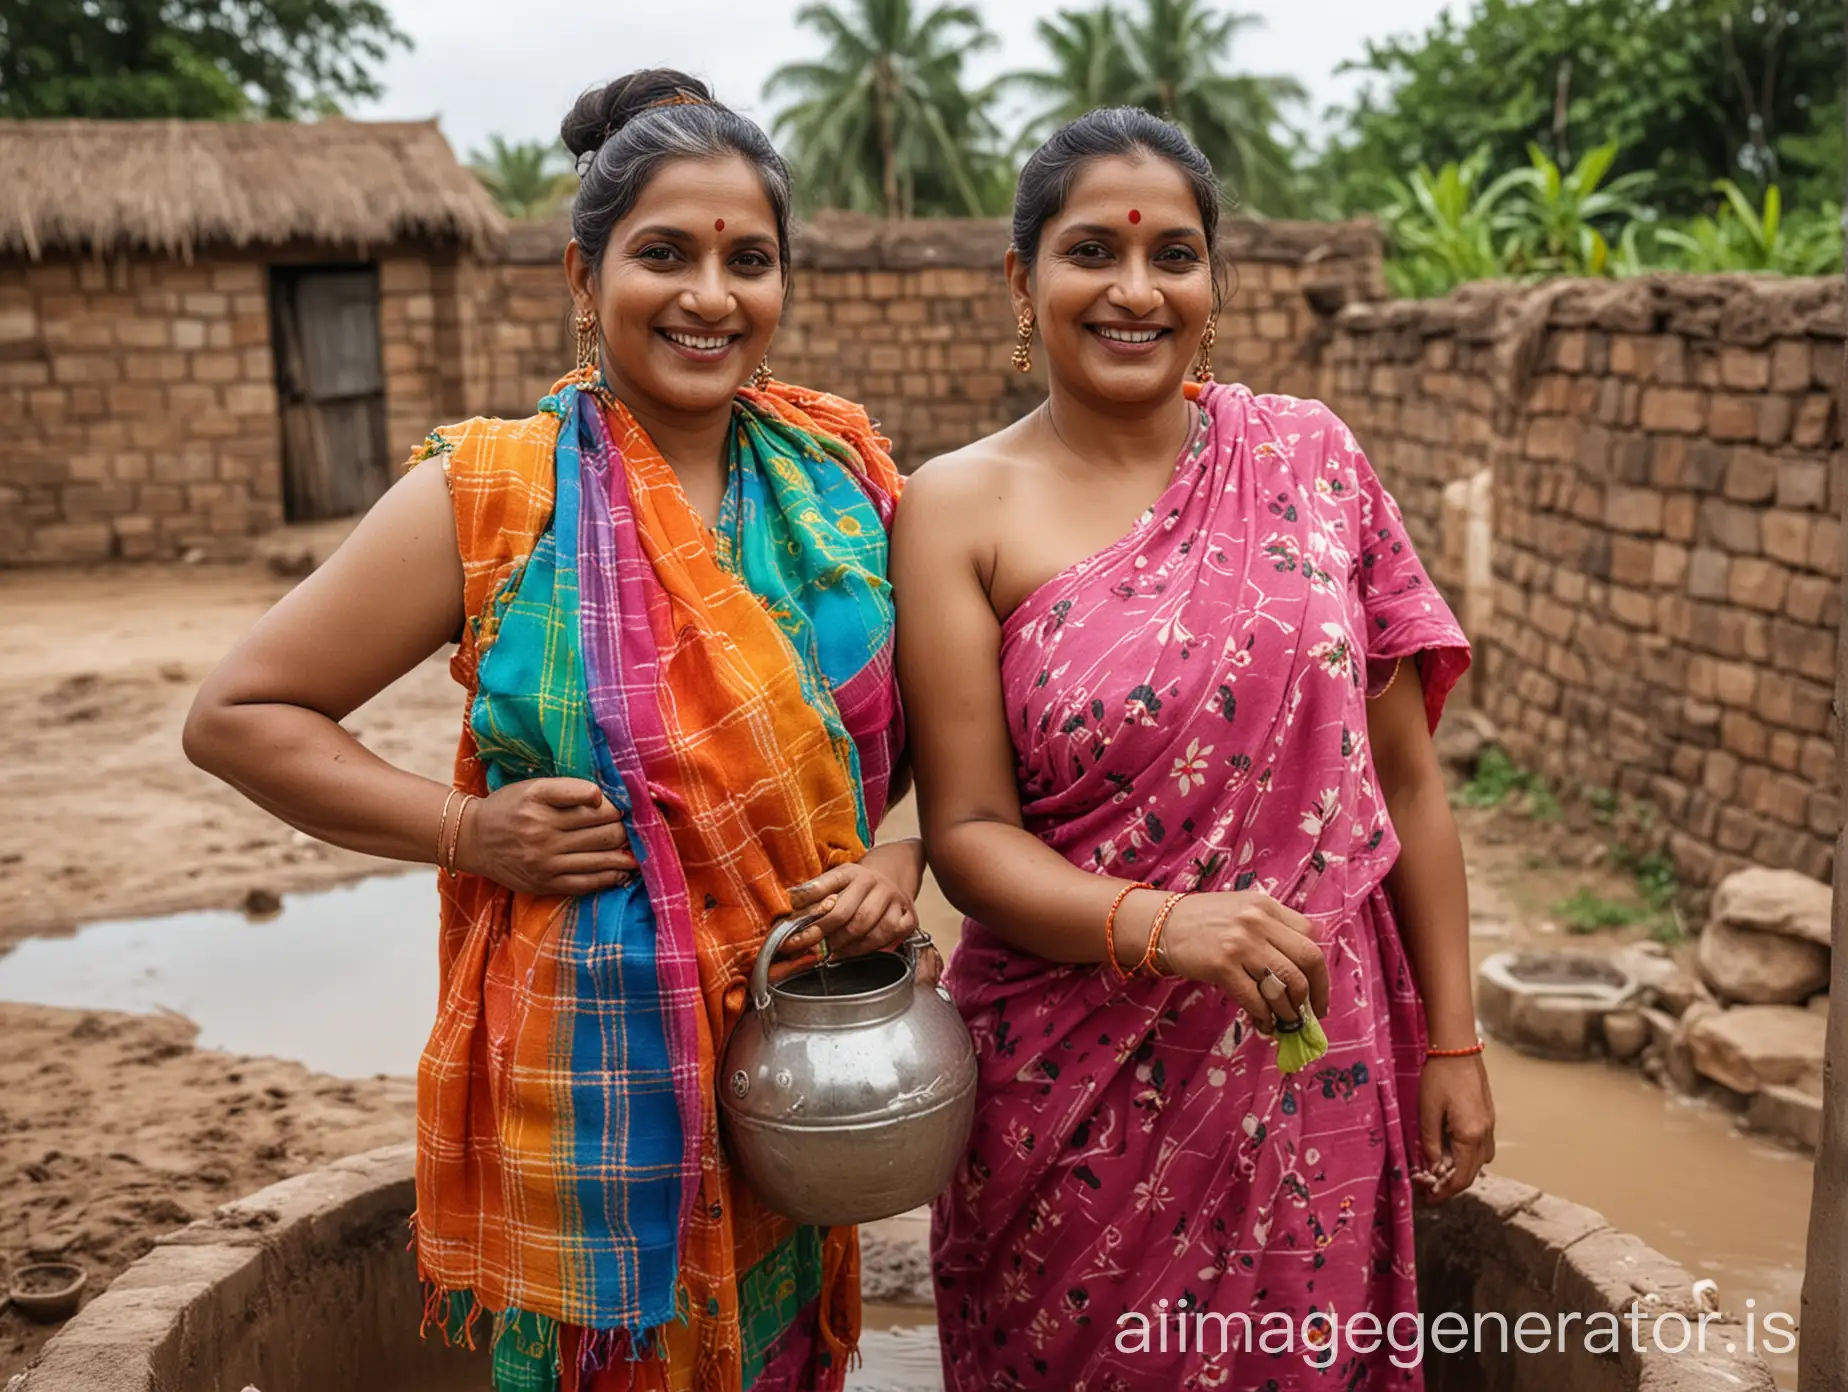 a mature fat indian woman with 45 years old age with curvy body wearing a colorful bath towel with full make up ,gajra bun style, holding a mud water pot, standing near a water well, she is happy and smiling, its cloudy